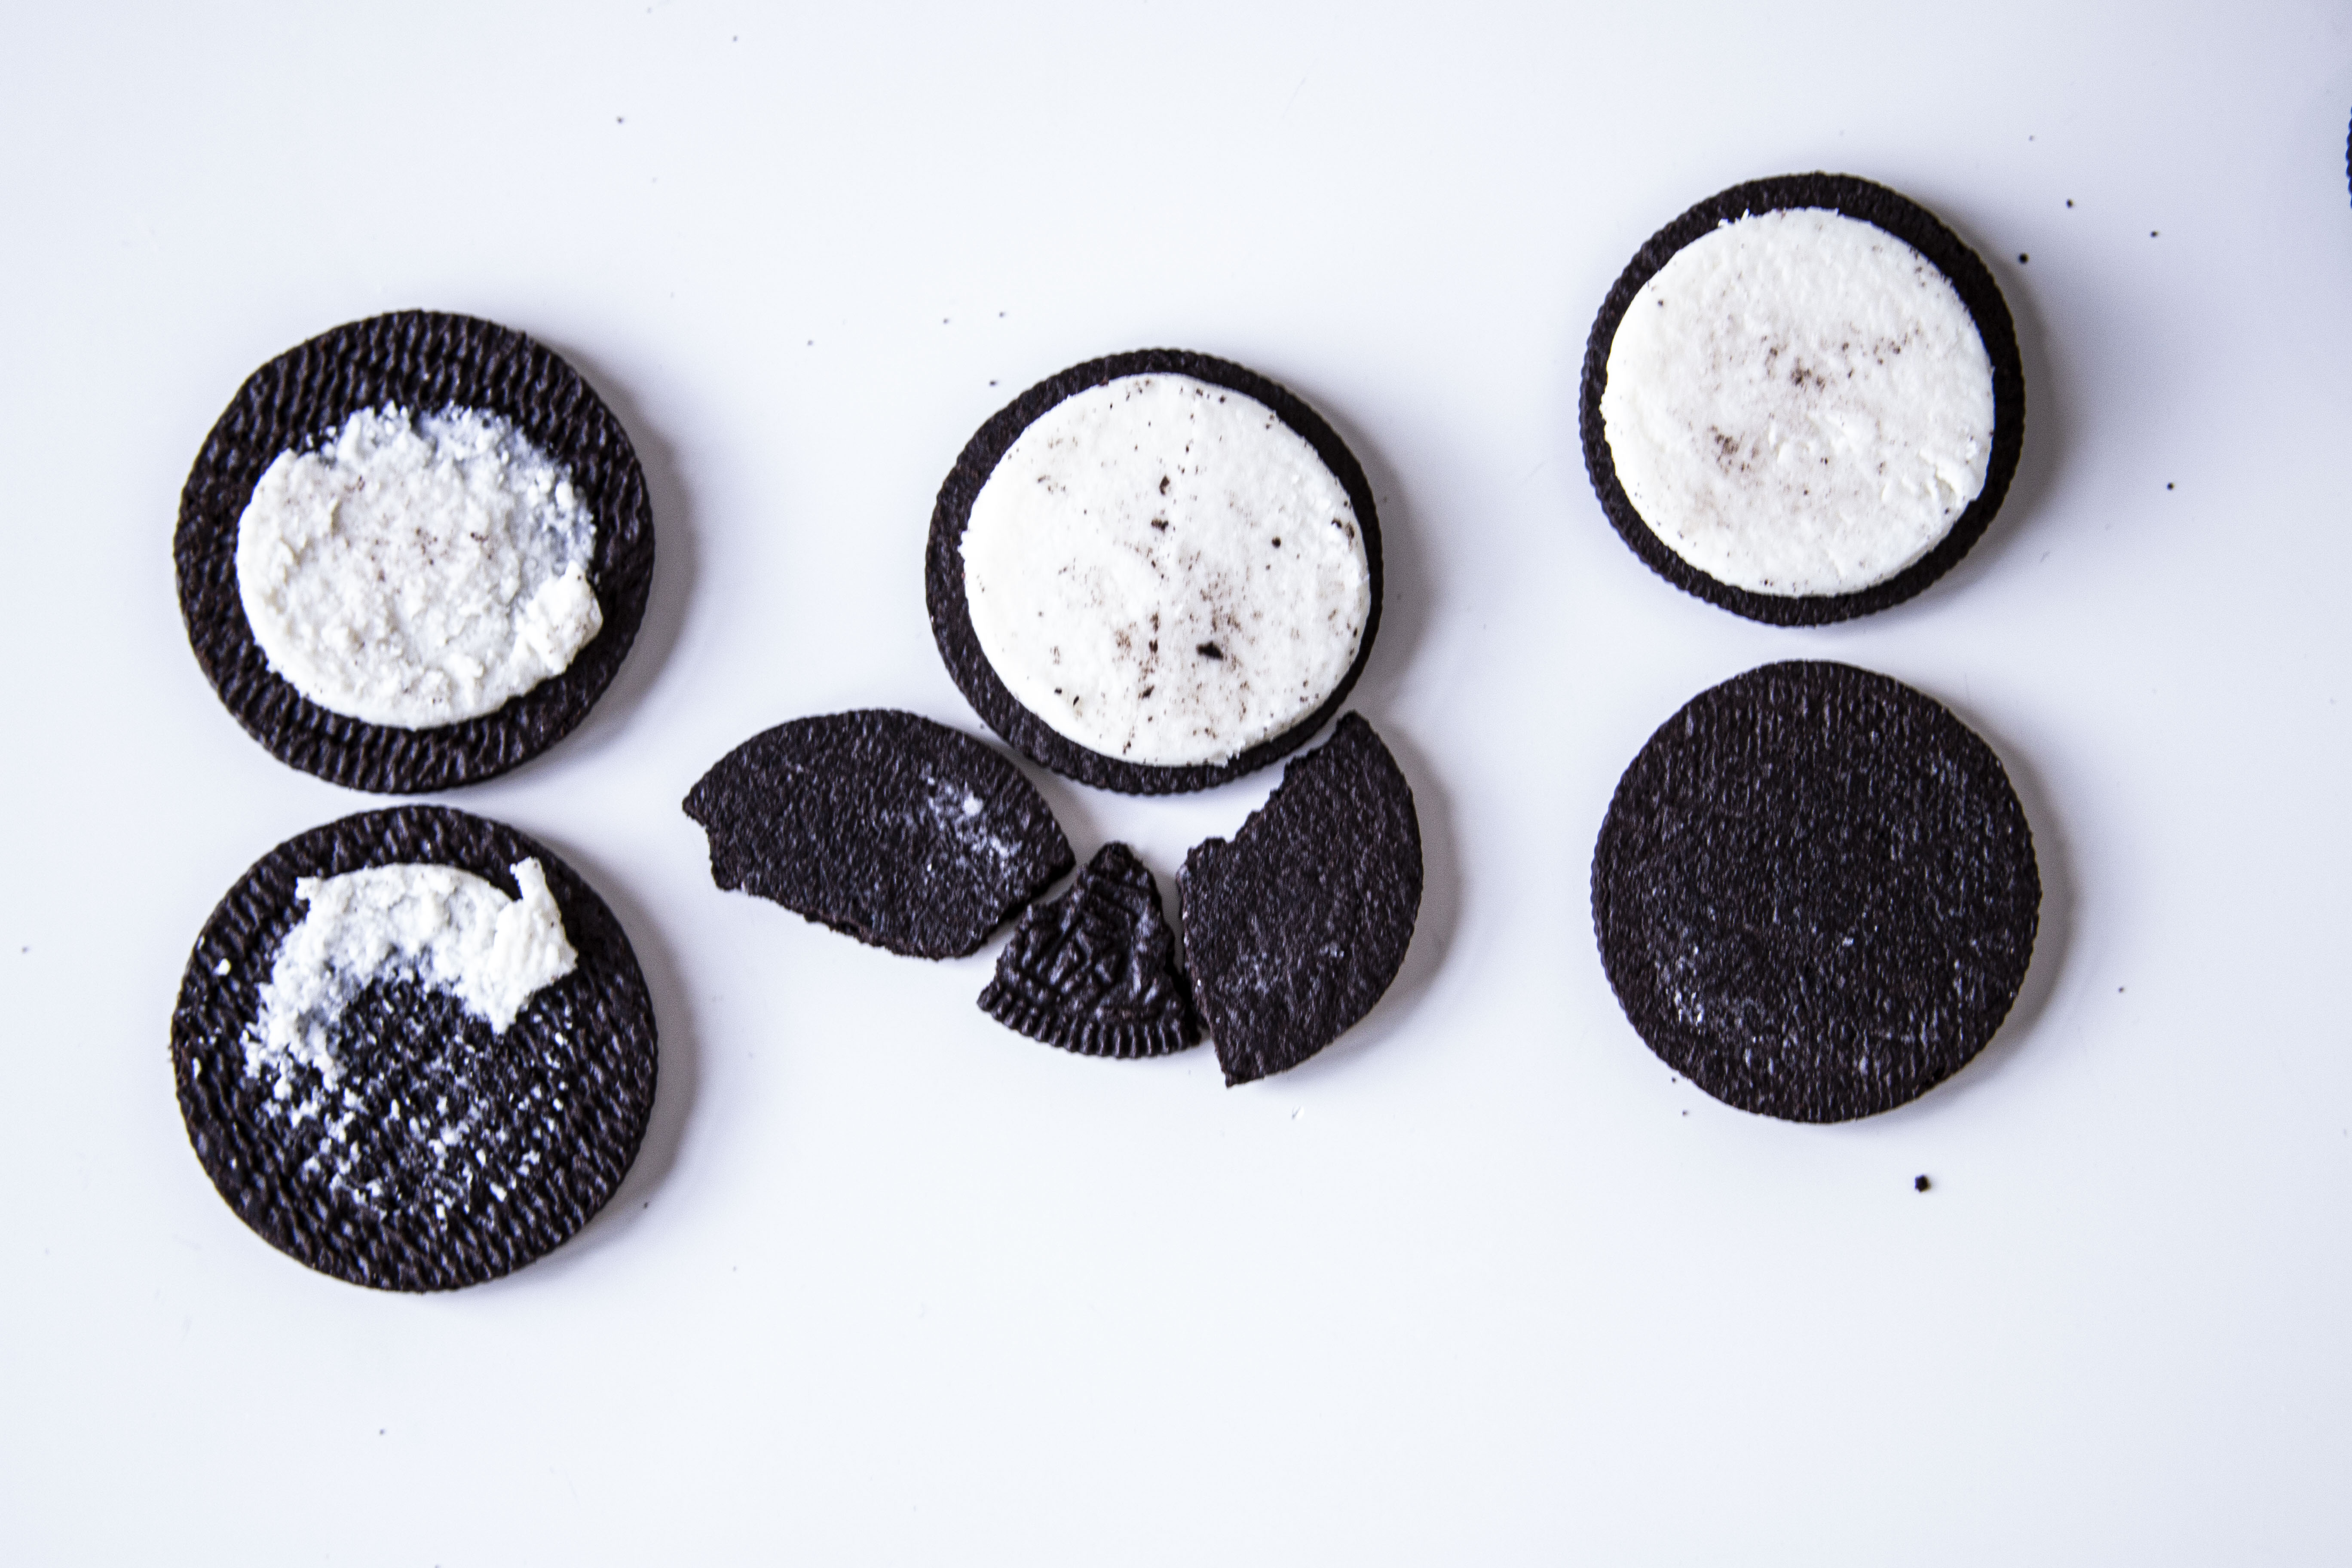 Materials Science Explained using an Oreo Cookie